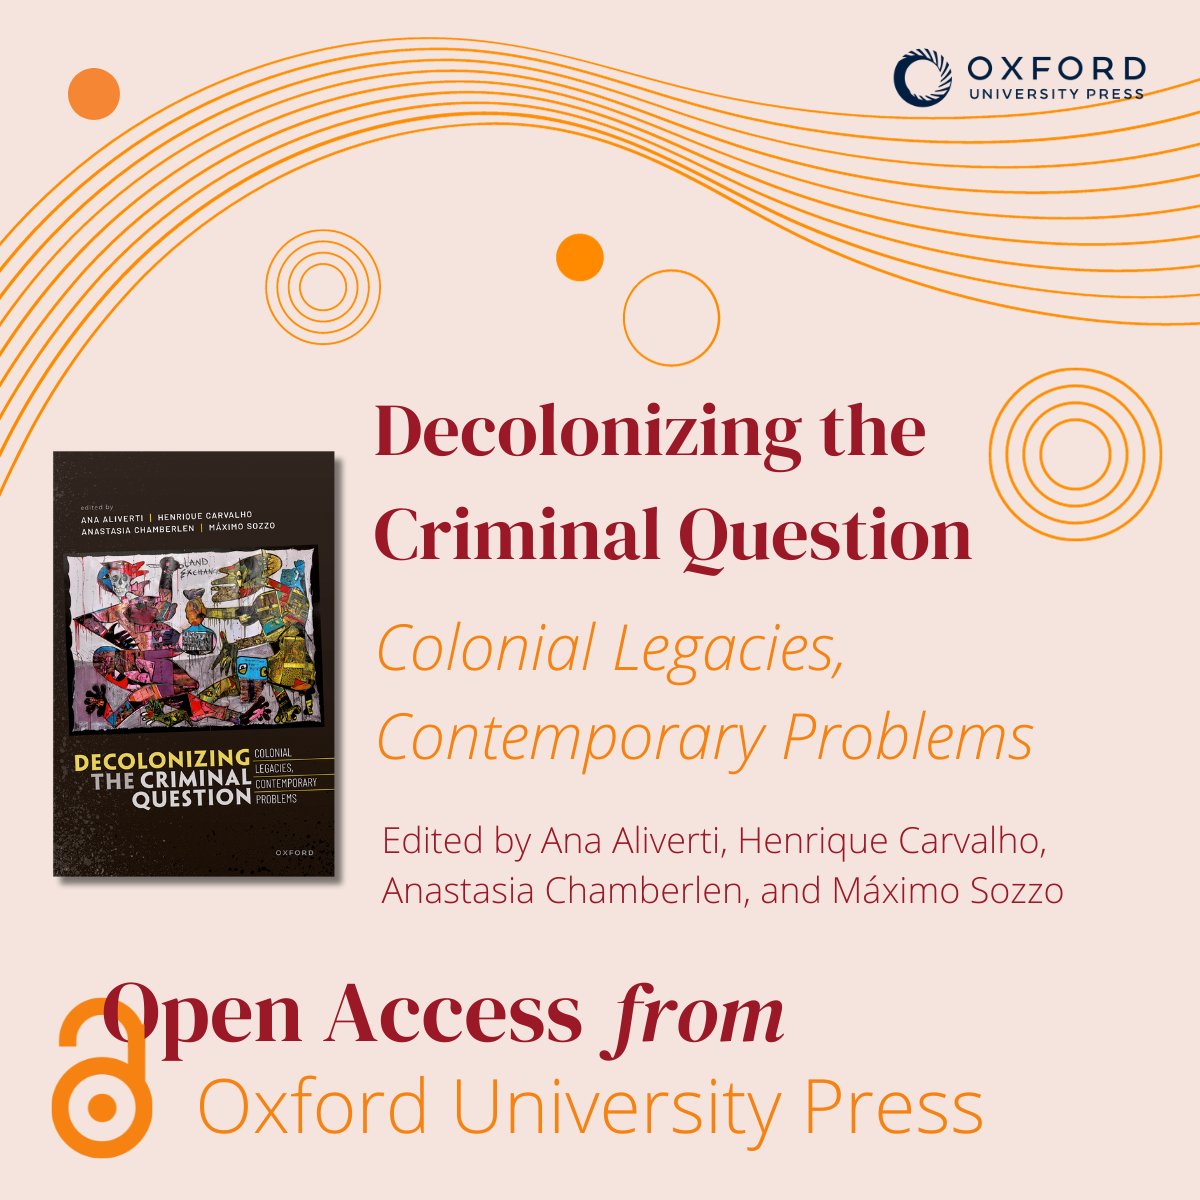 “Decolonizing the Criminal Question” edited by @a_aliverti @HRDCCarvalho @a_chamberlen and Máximo Sozzo explores the uneasy relationship between criminal justice and colonialism. Available open access. oxford.ly/46Mf9L0